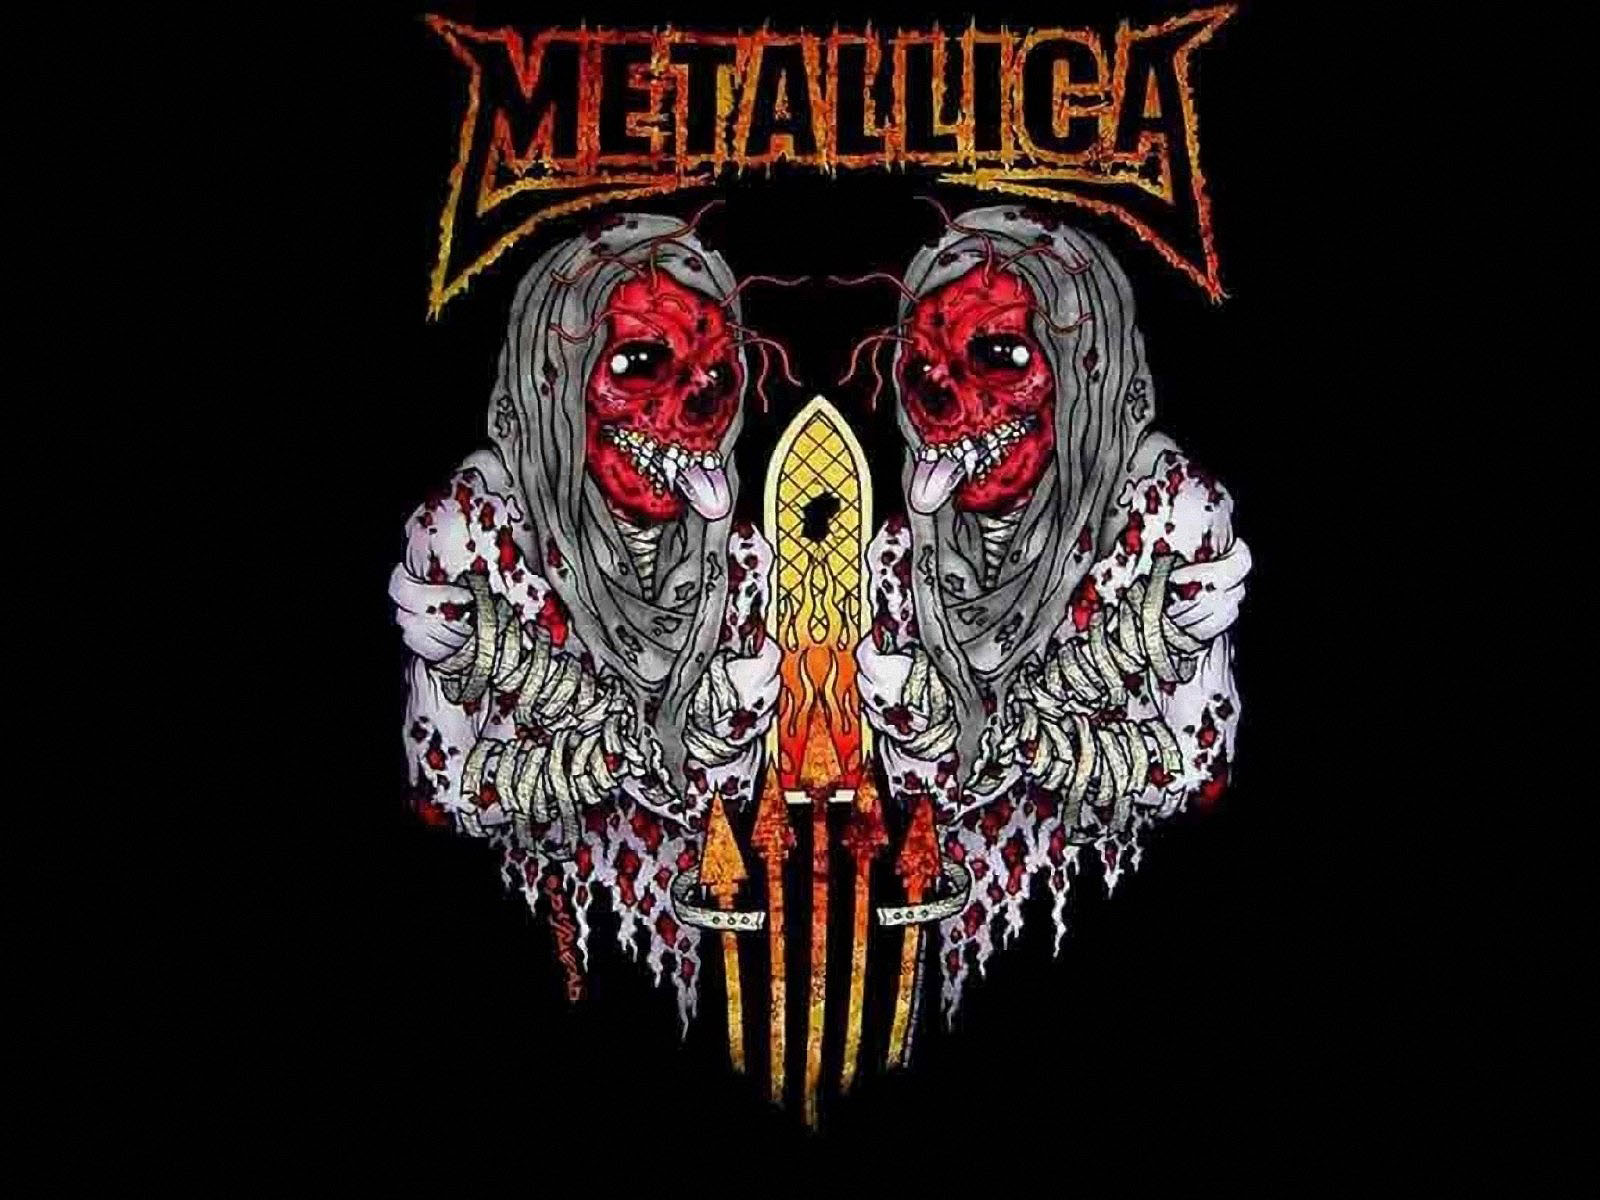 Metallica Wallpaper and Background Image | 1600x1200 | ID ...